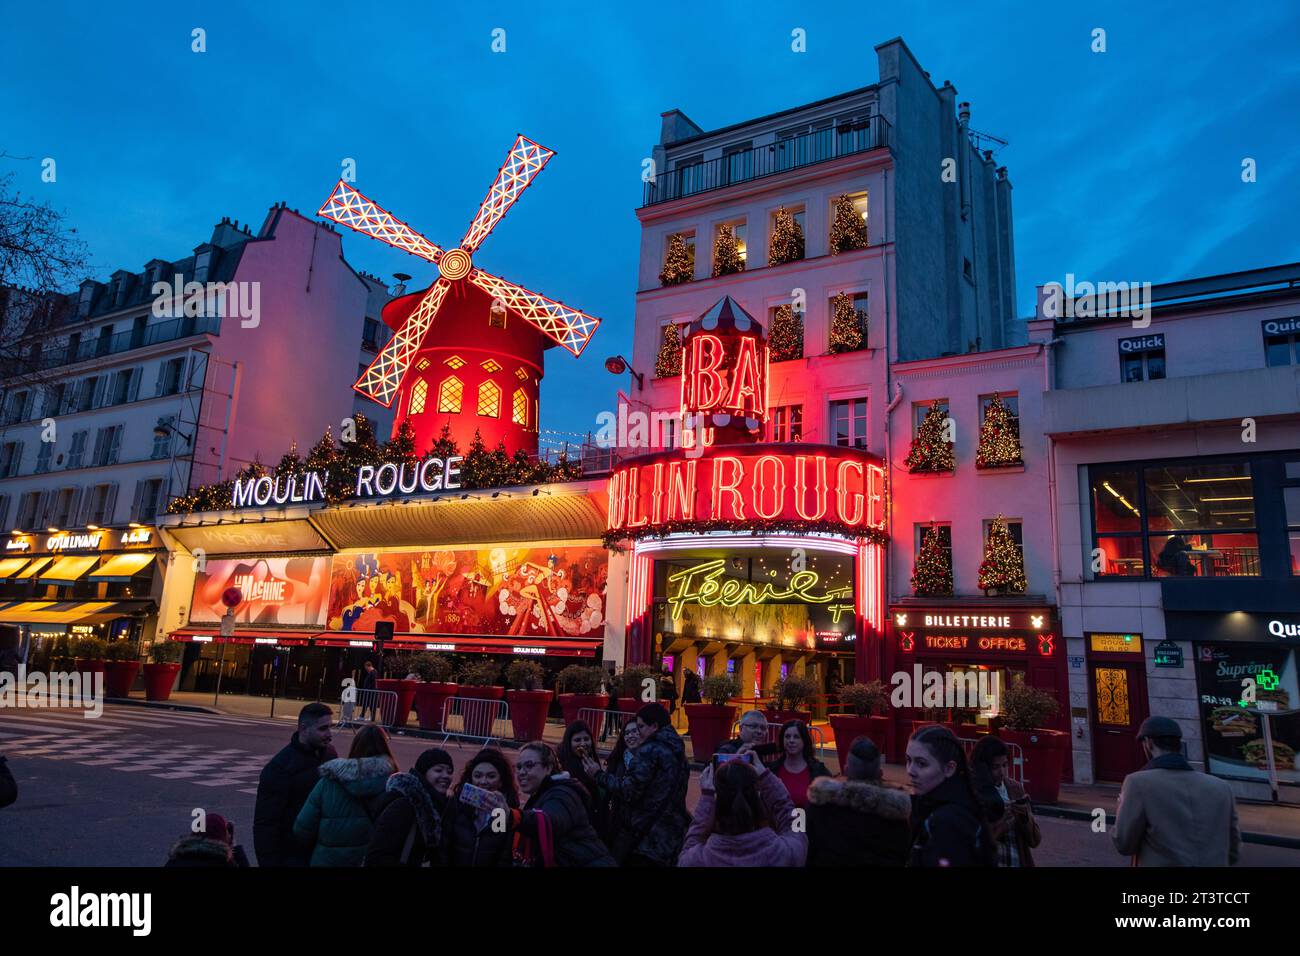 The Moulin Rouge windmill, Moulin Rouge is a famous cabaret built in 1889, located in the red-light district of Pigalle in Paris, France. Stock Photo